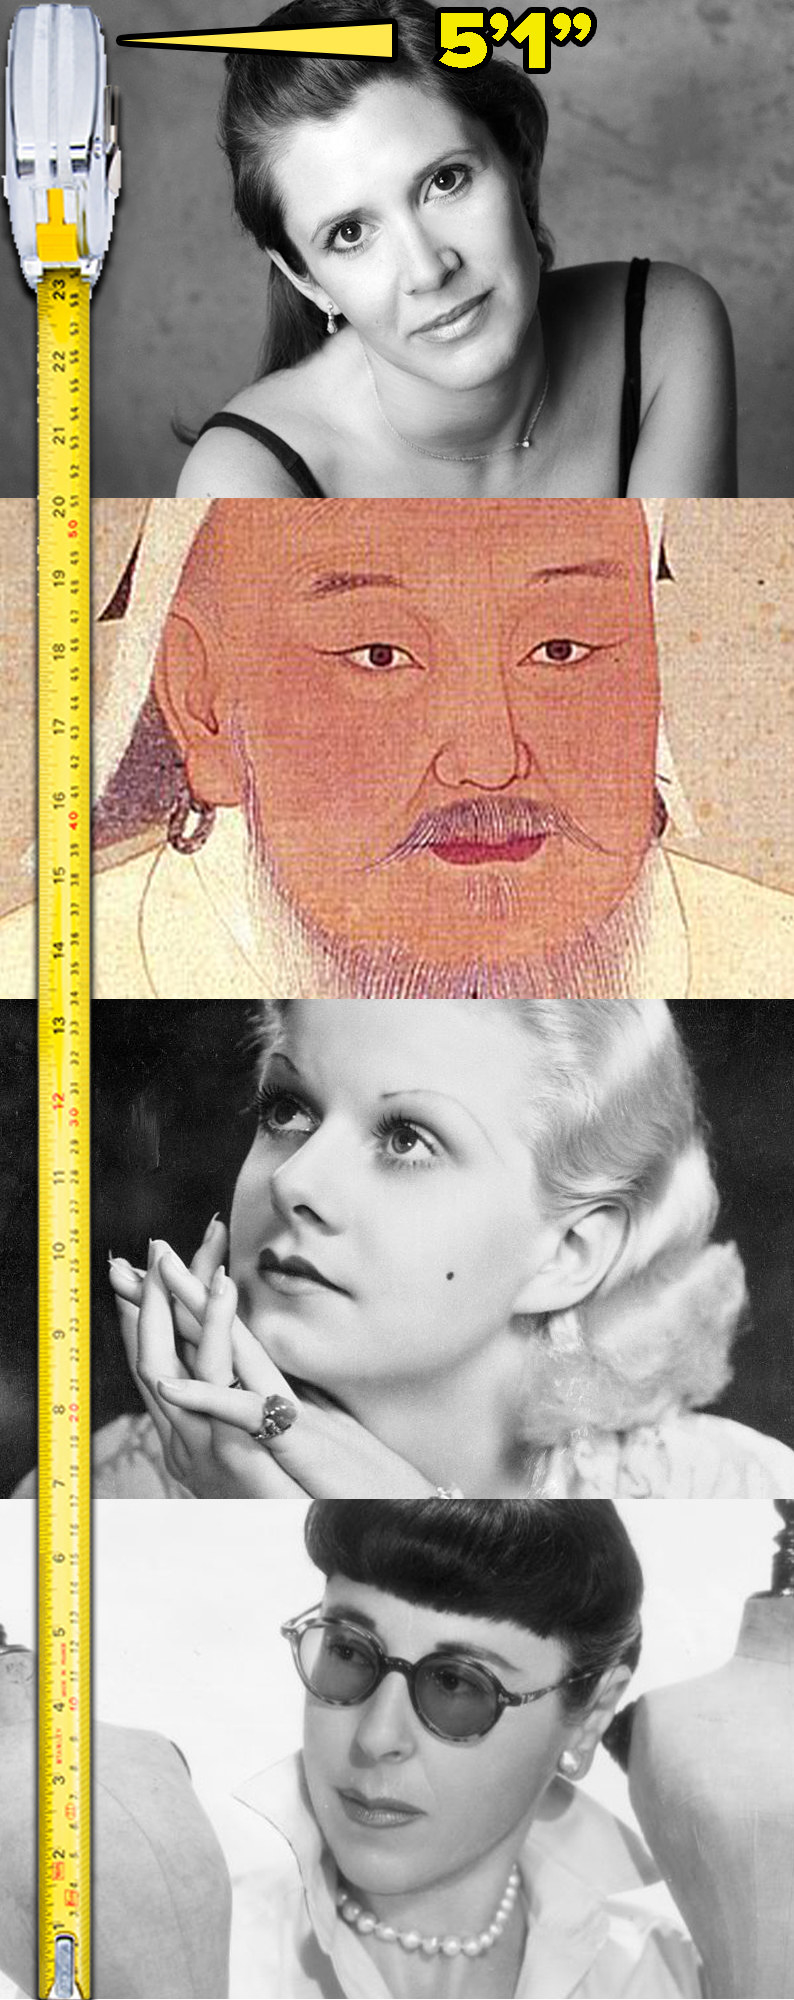 Stacked images of Carrie Fisher, Genghis Khan, Jean Harlow, and Edith Head next to a measuring tape